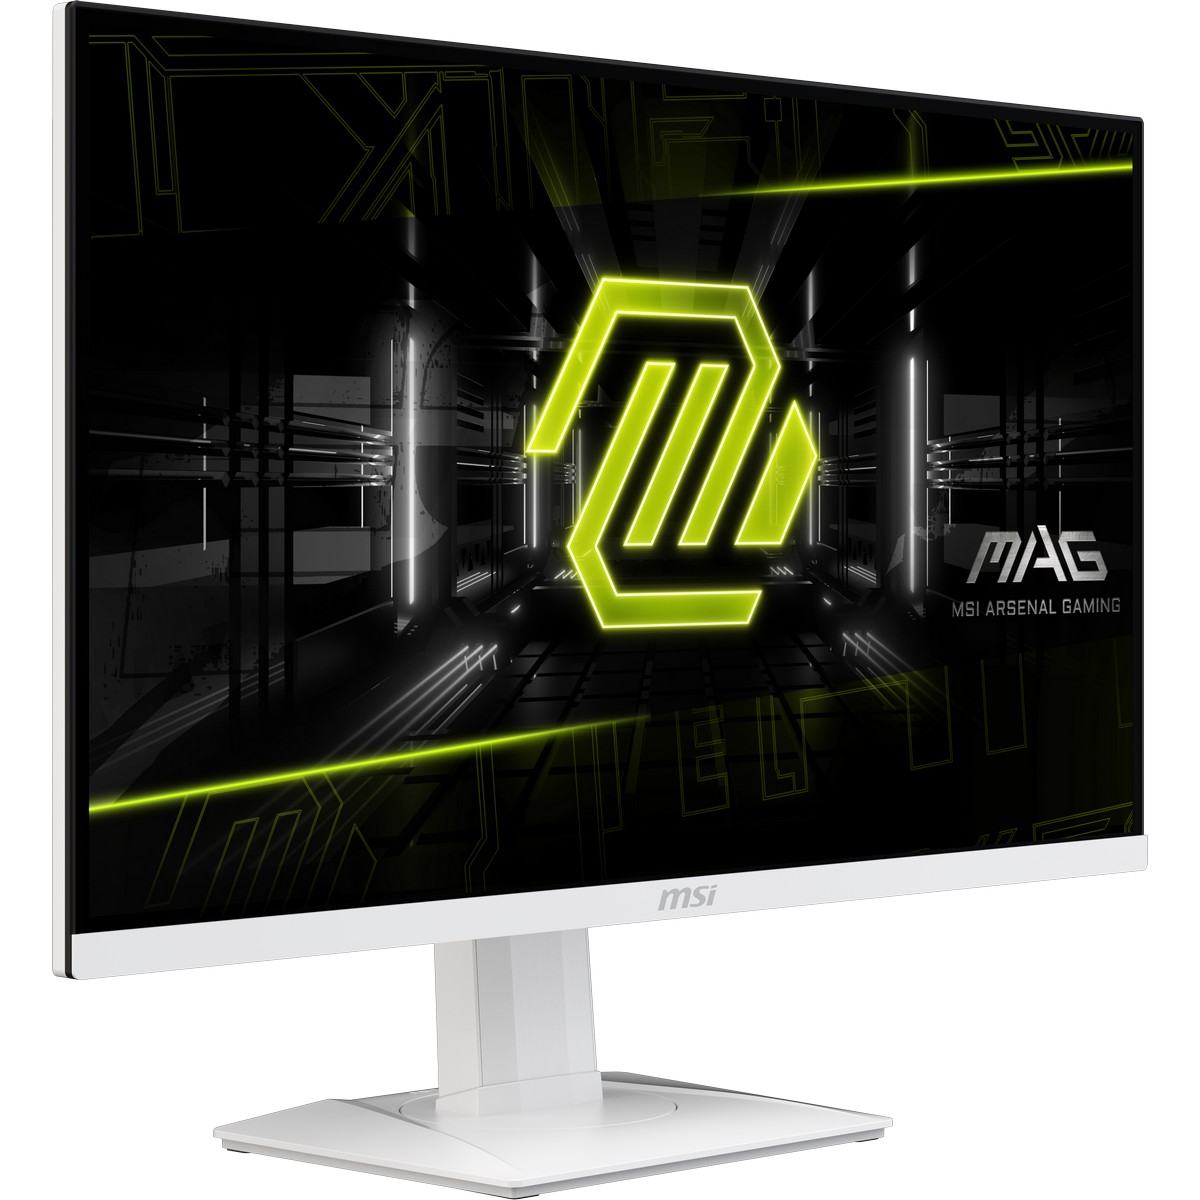 MSI - MSI 27" MAG 274QRFW 2560x1440 IPS 180Hz A-Sync Widescreen Gaming Monitor